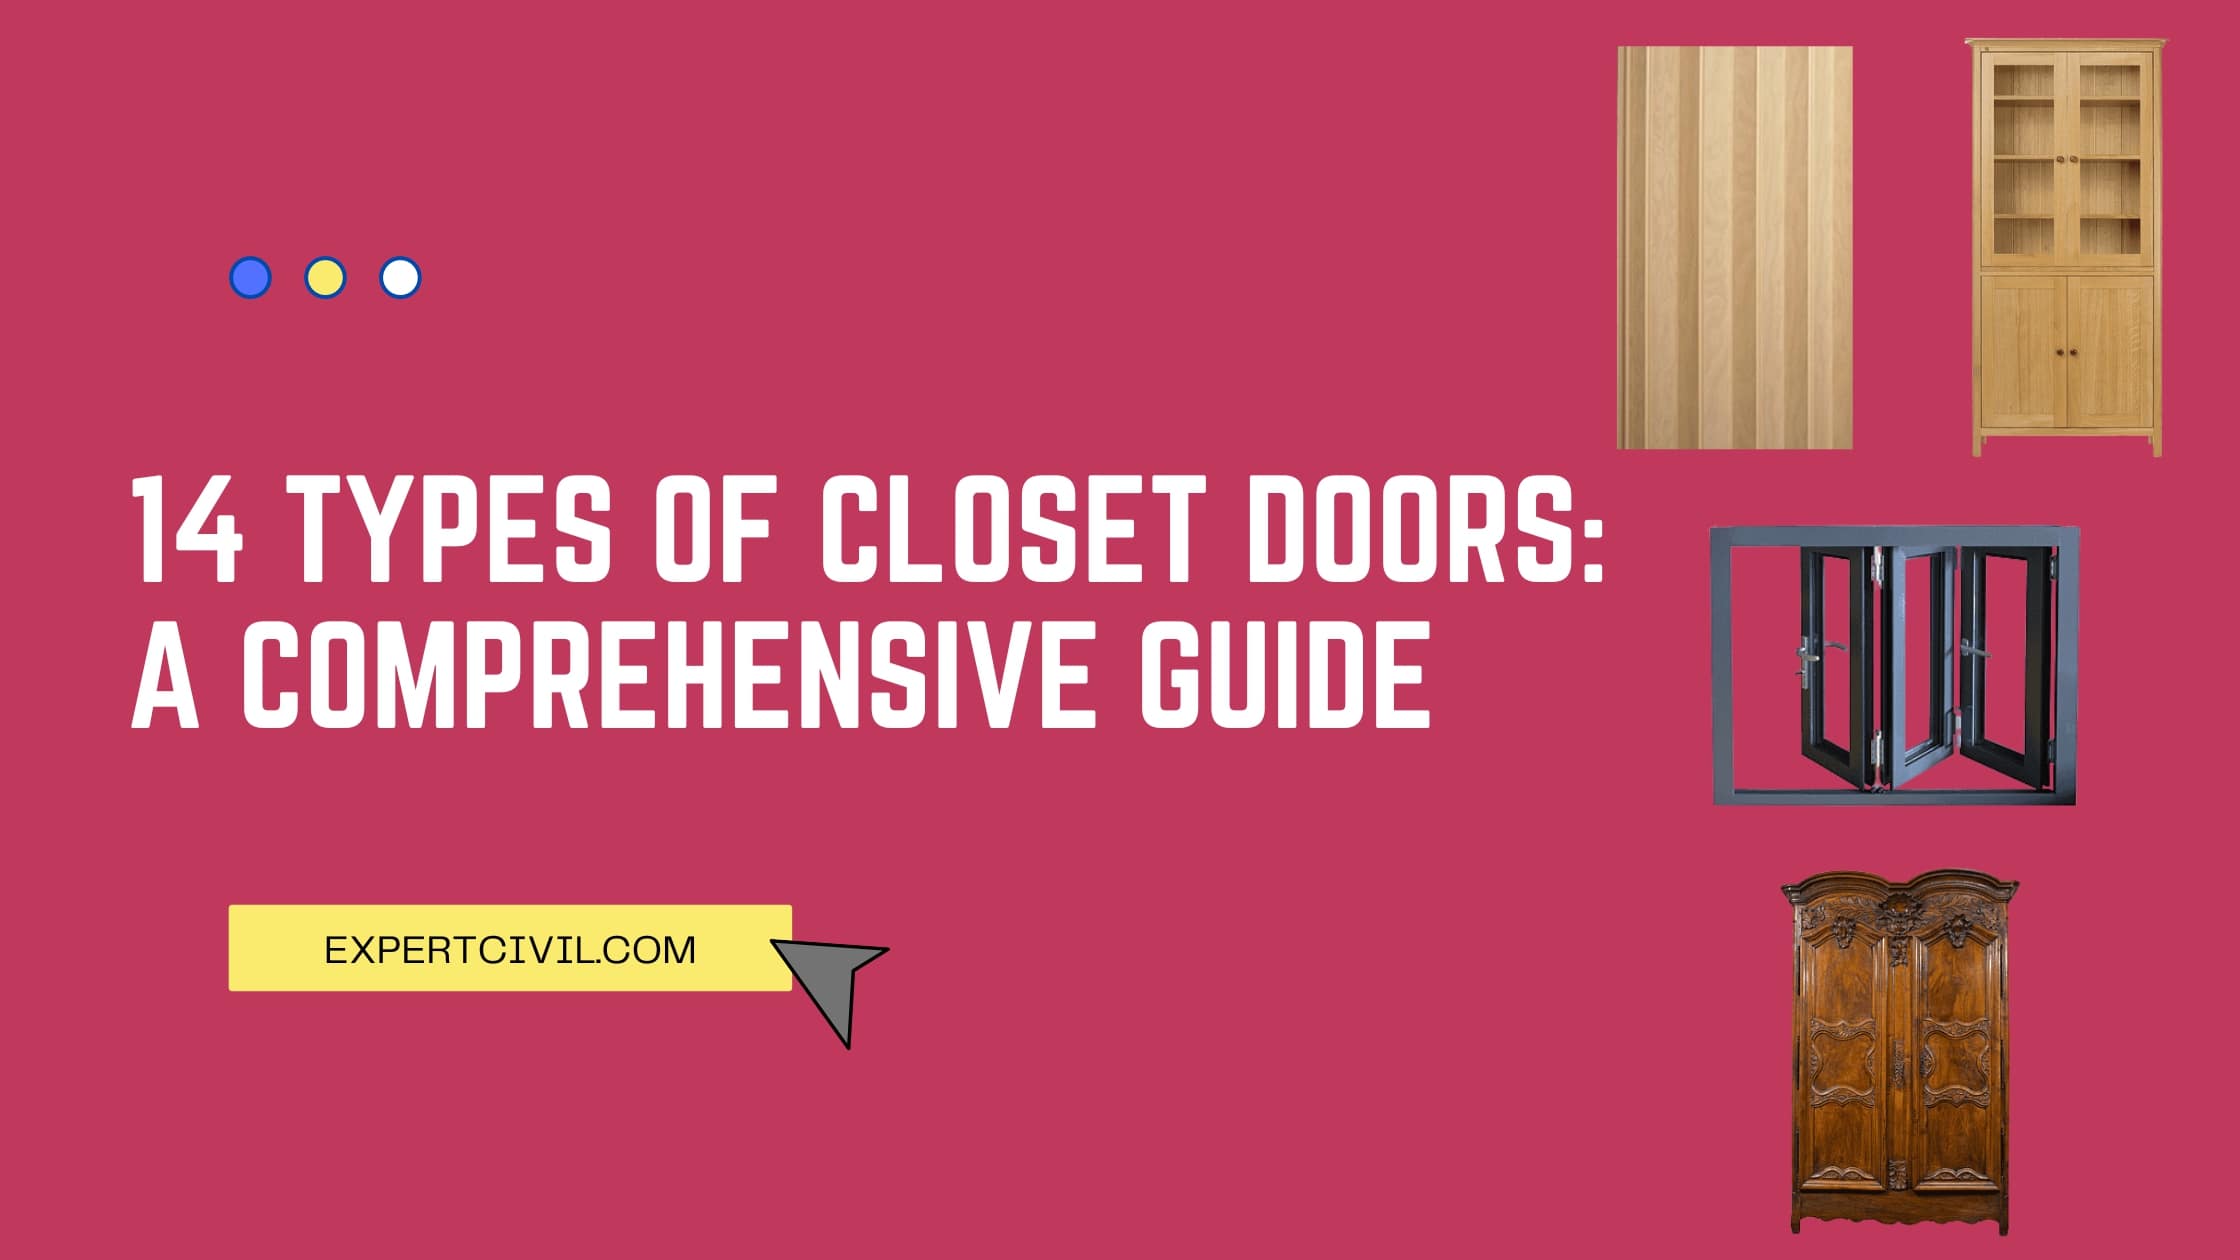 14 Types of Closet Doors: A Comprehensive Guide to Choosing the Right One for Your Home